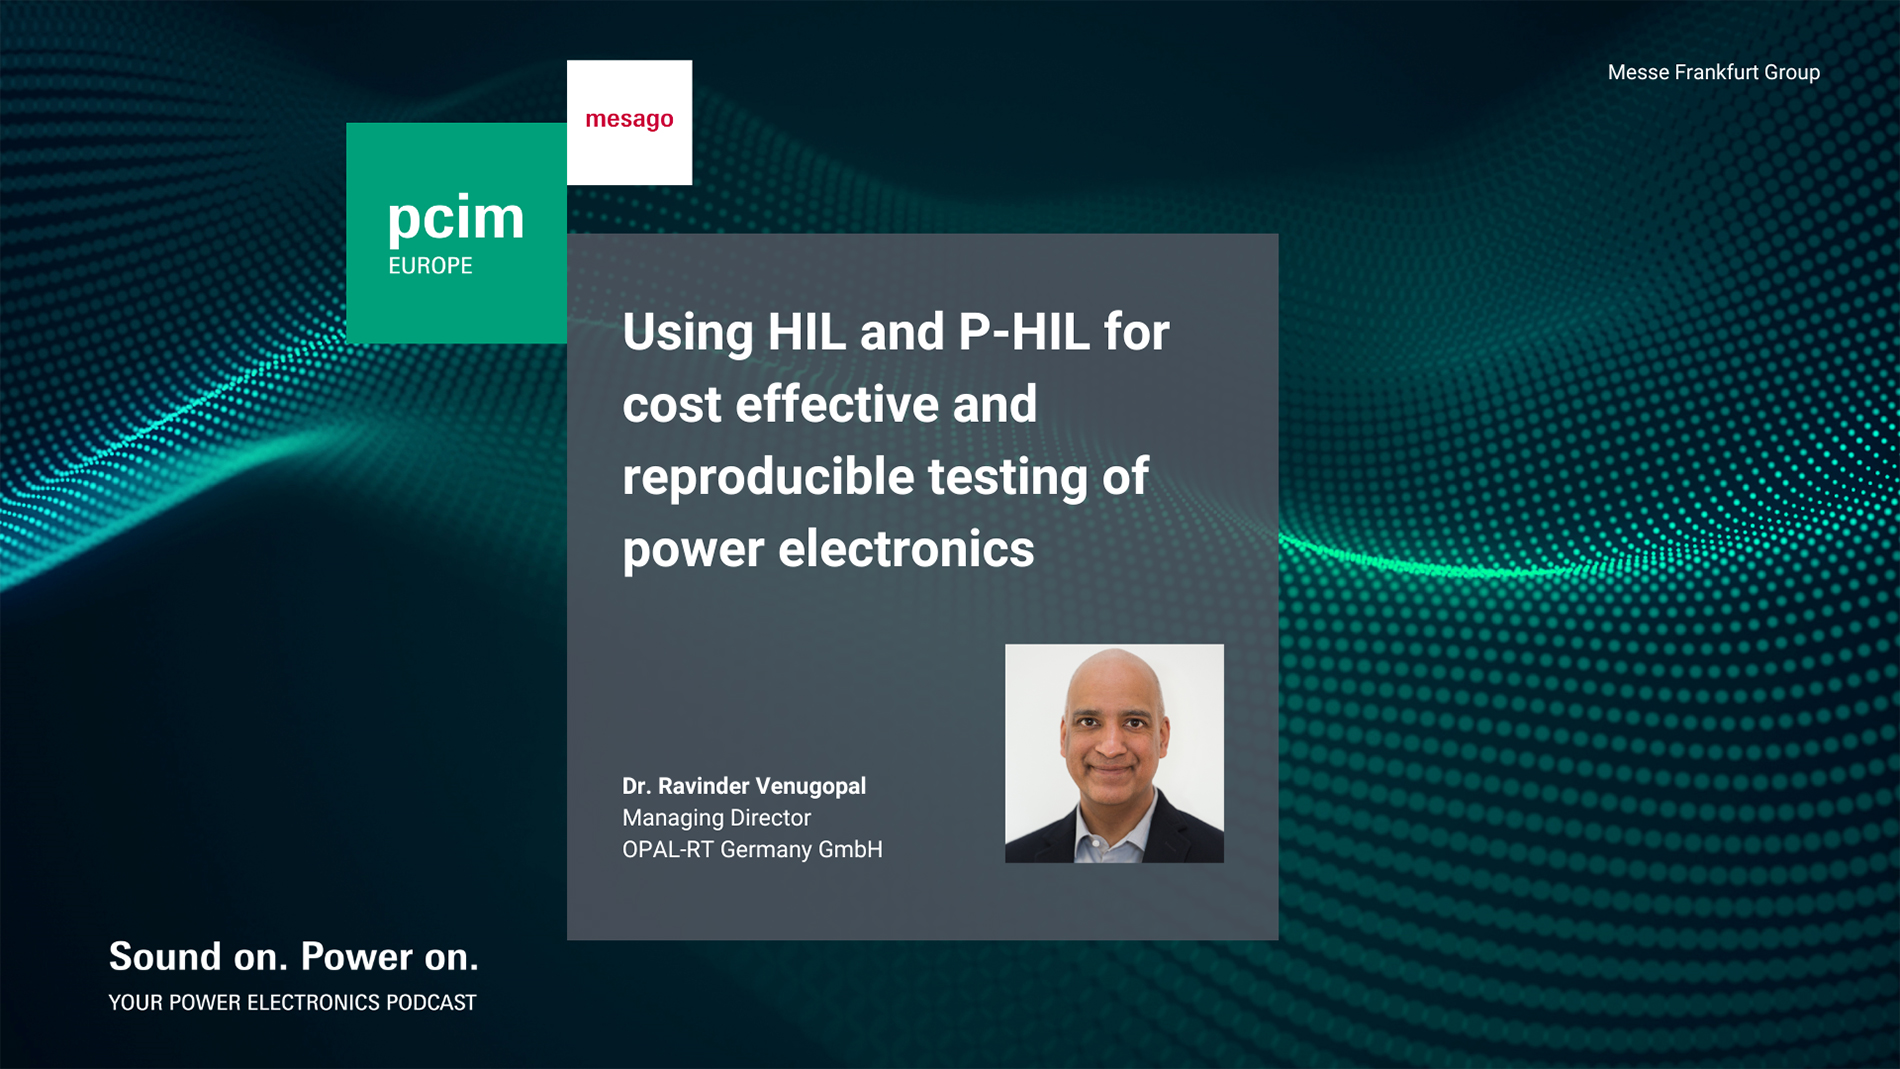 Dr. Ravi Venugopal from OPAL-RT Germany GmbH on Using HIL and P-HIL for cost effective and reproducible testing of power electronics